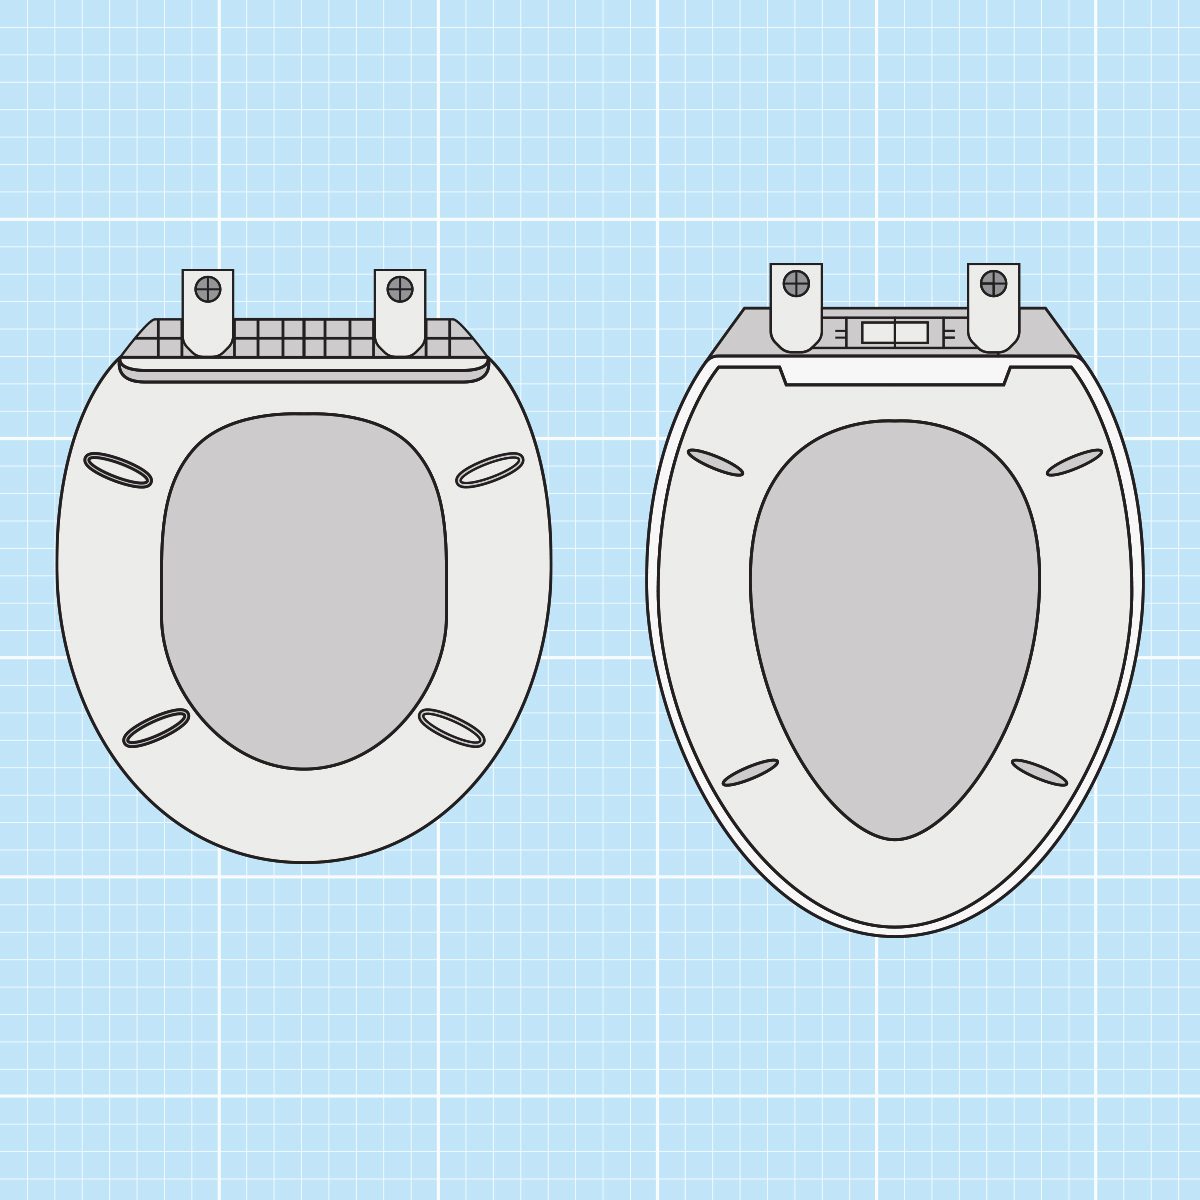 Rounded Toilet vs. Elongated Toilet: Which Is Best For You?